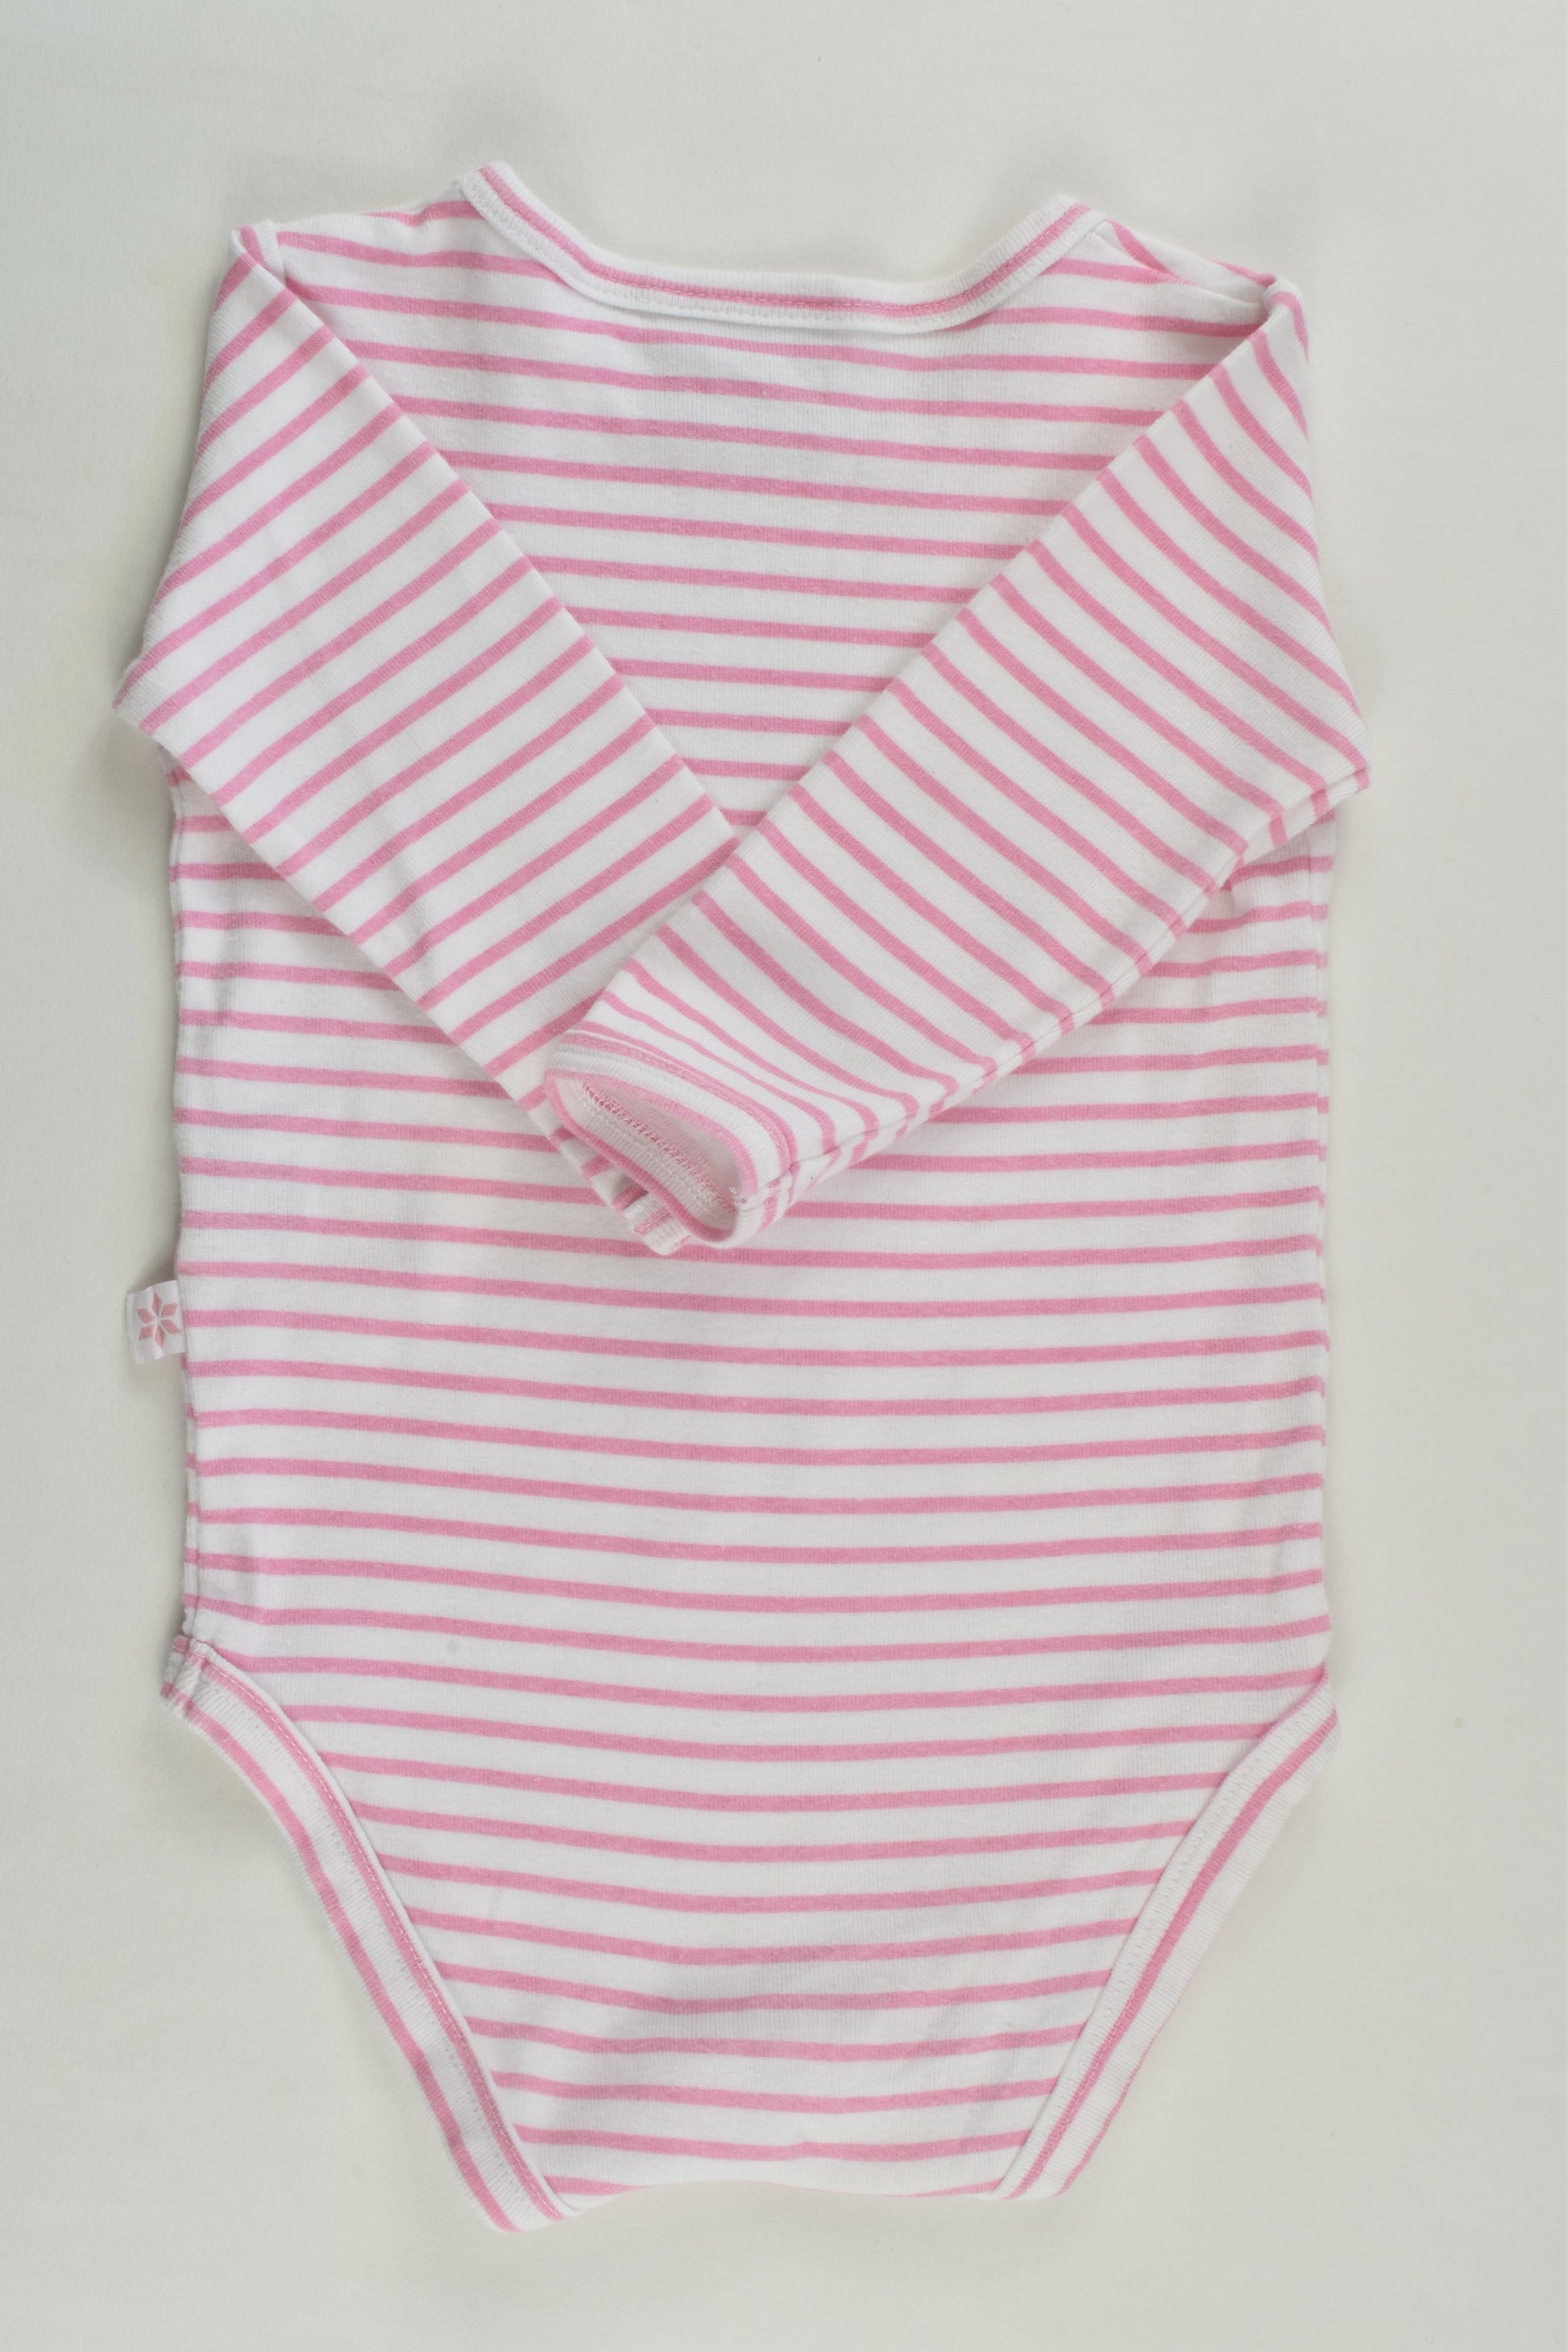 Marquise Size 0 Striped Bodysuit